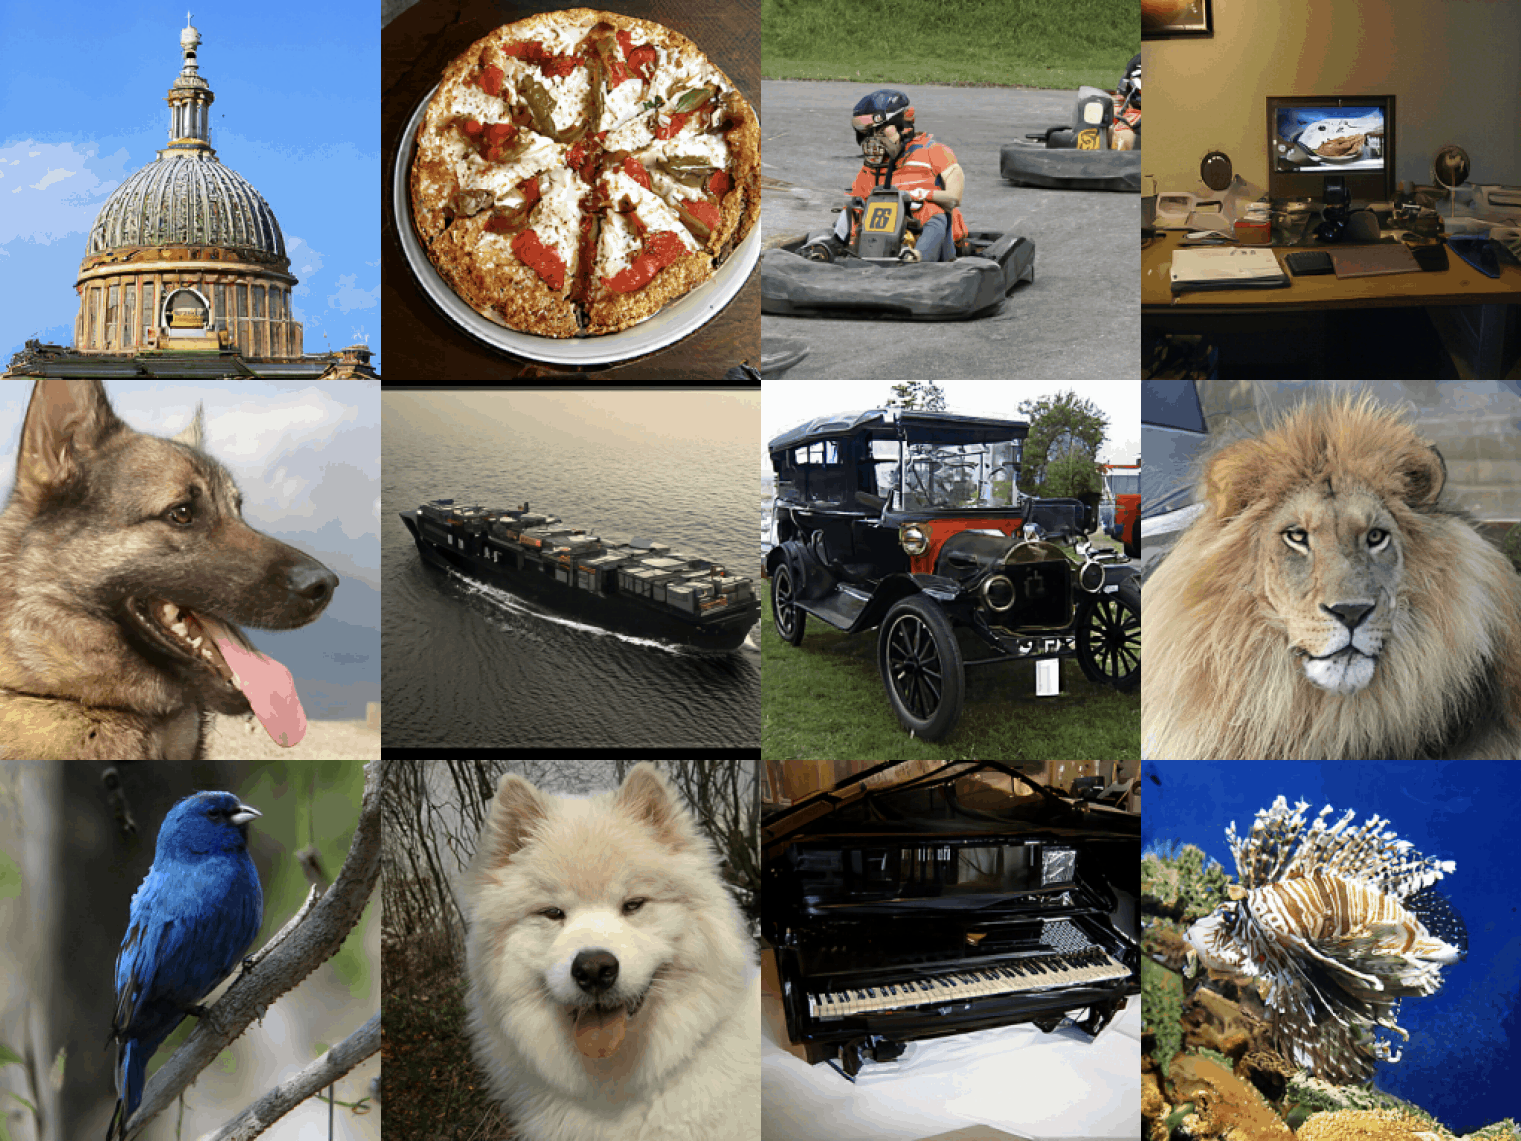 Samples from denoising diffusion probabilistic models trained on CelebA-HQ, LSUN Bedrooms, LSUN church and LSUN cat datasets at 256×256 resolution: Selected generated images from our 256×256 class-conditional ImageNet model.